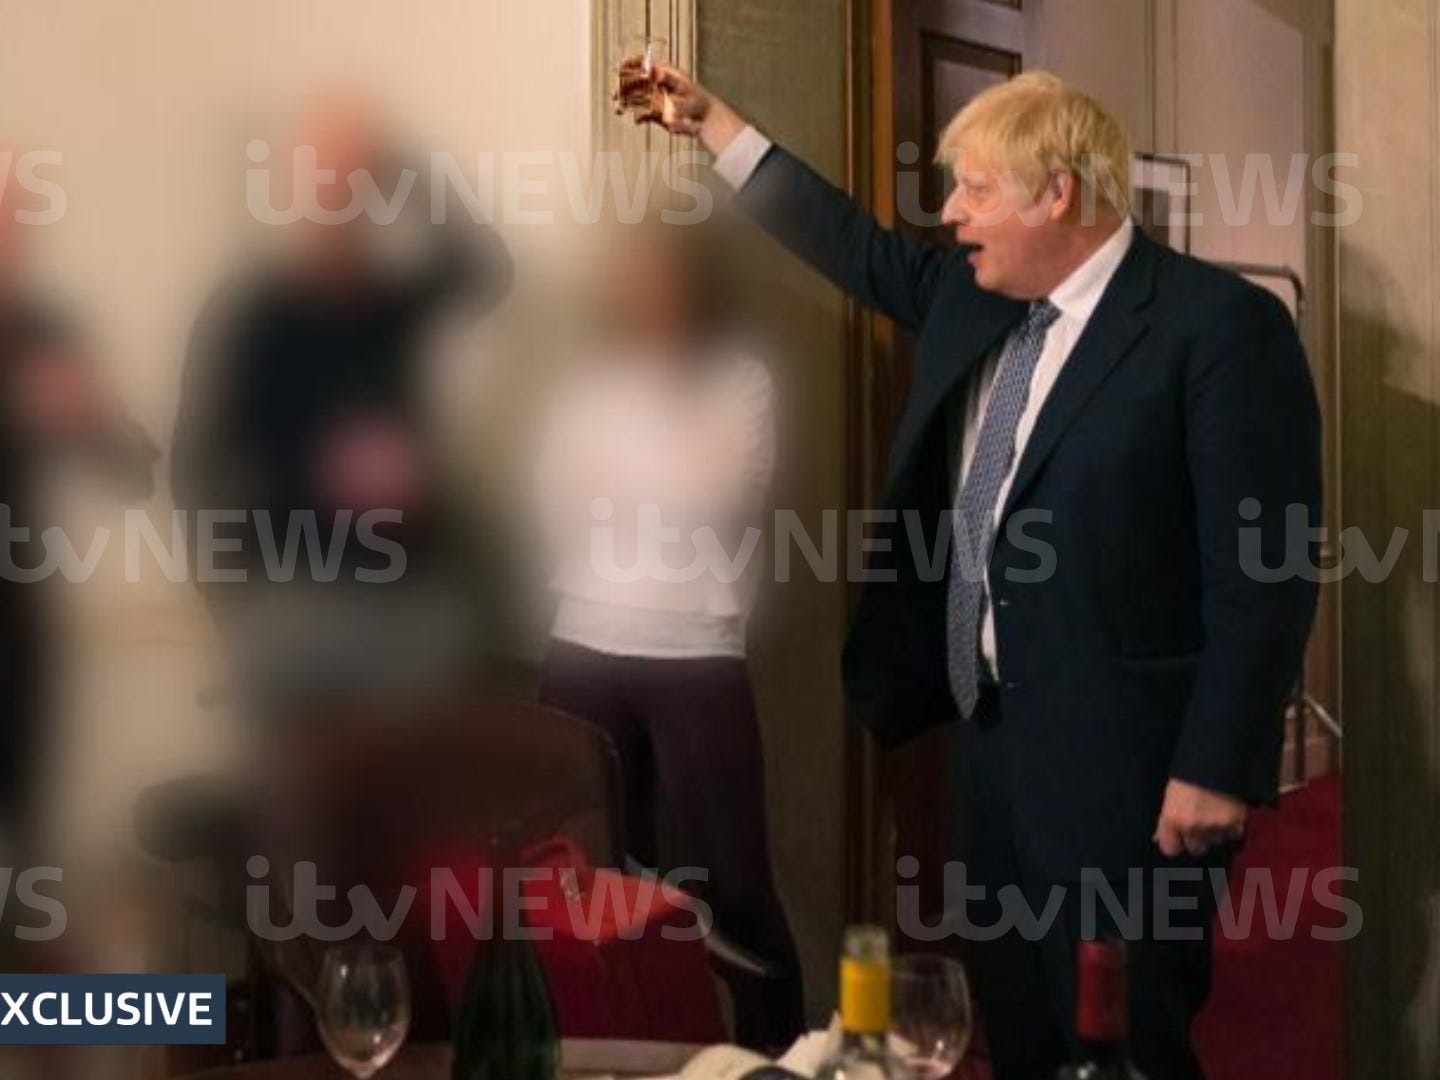 Boris Johnson gives a toast at the part thrown during one of England's lockdowns. ITV News